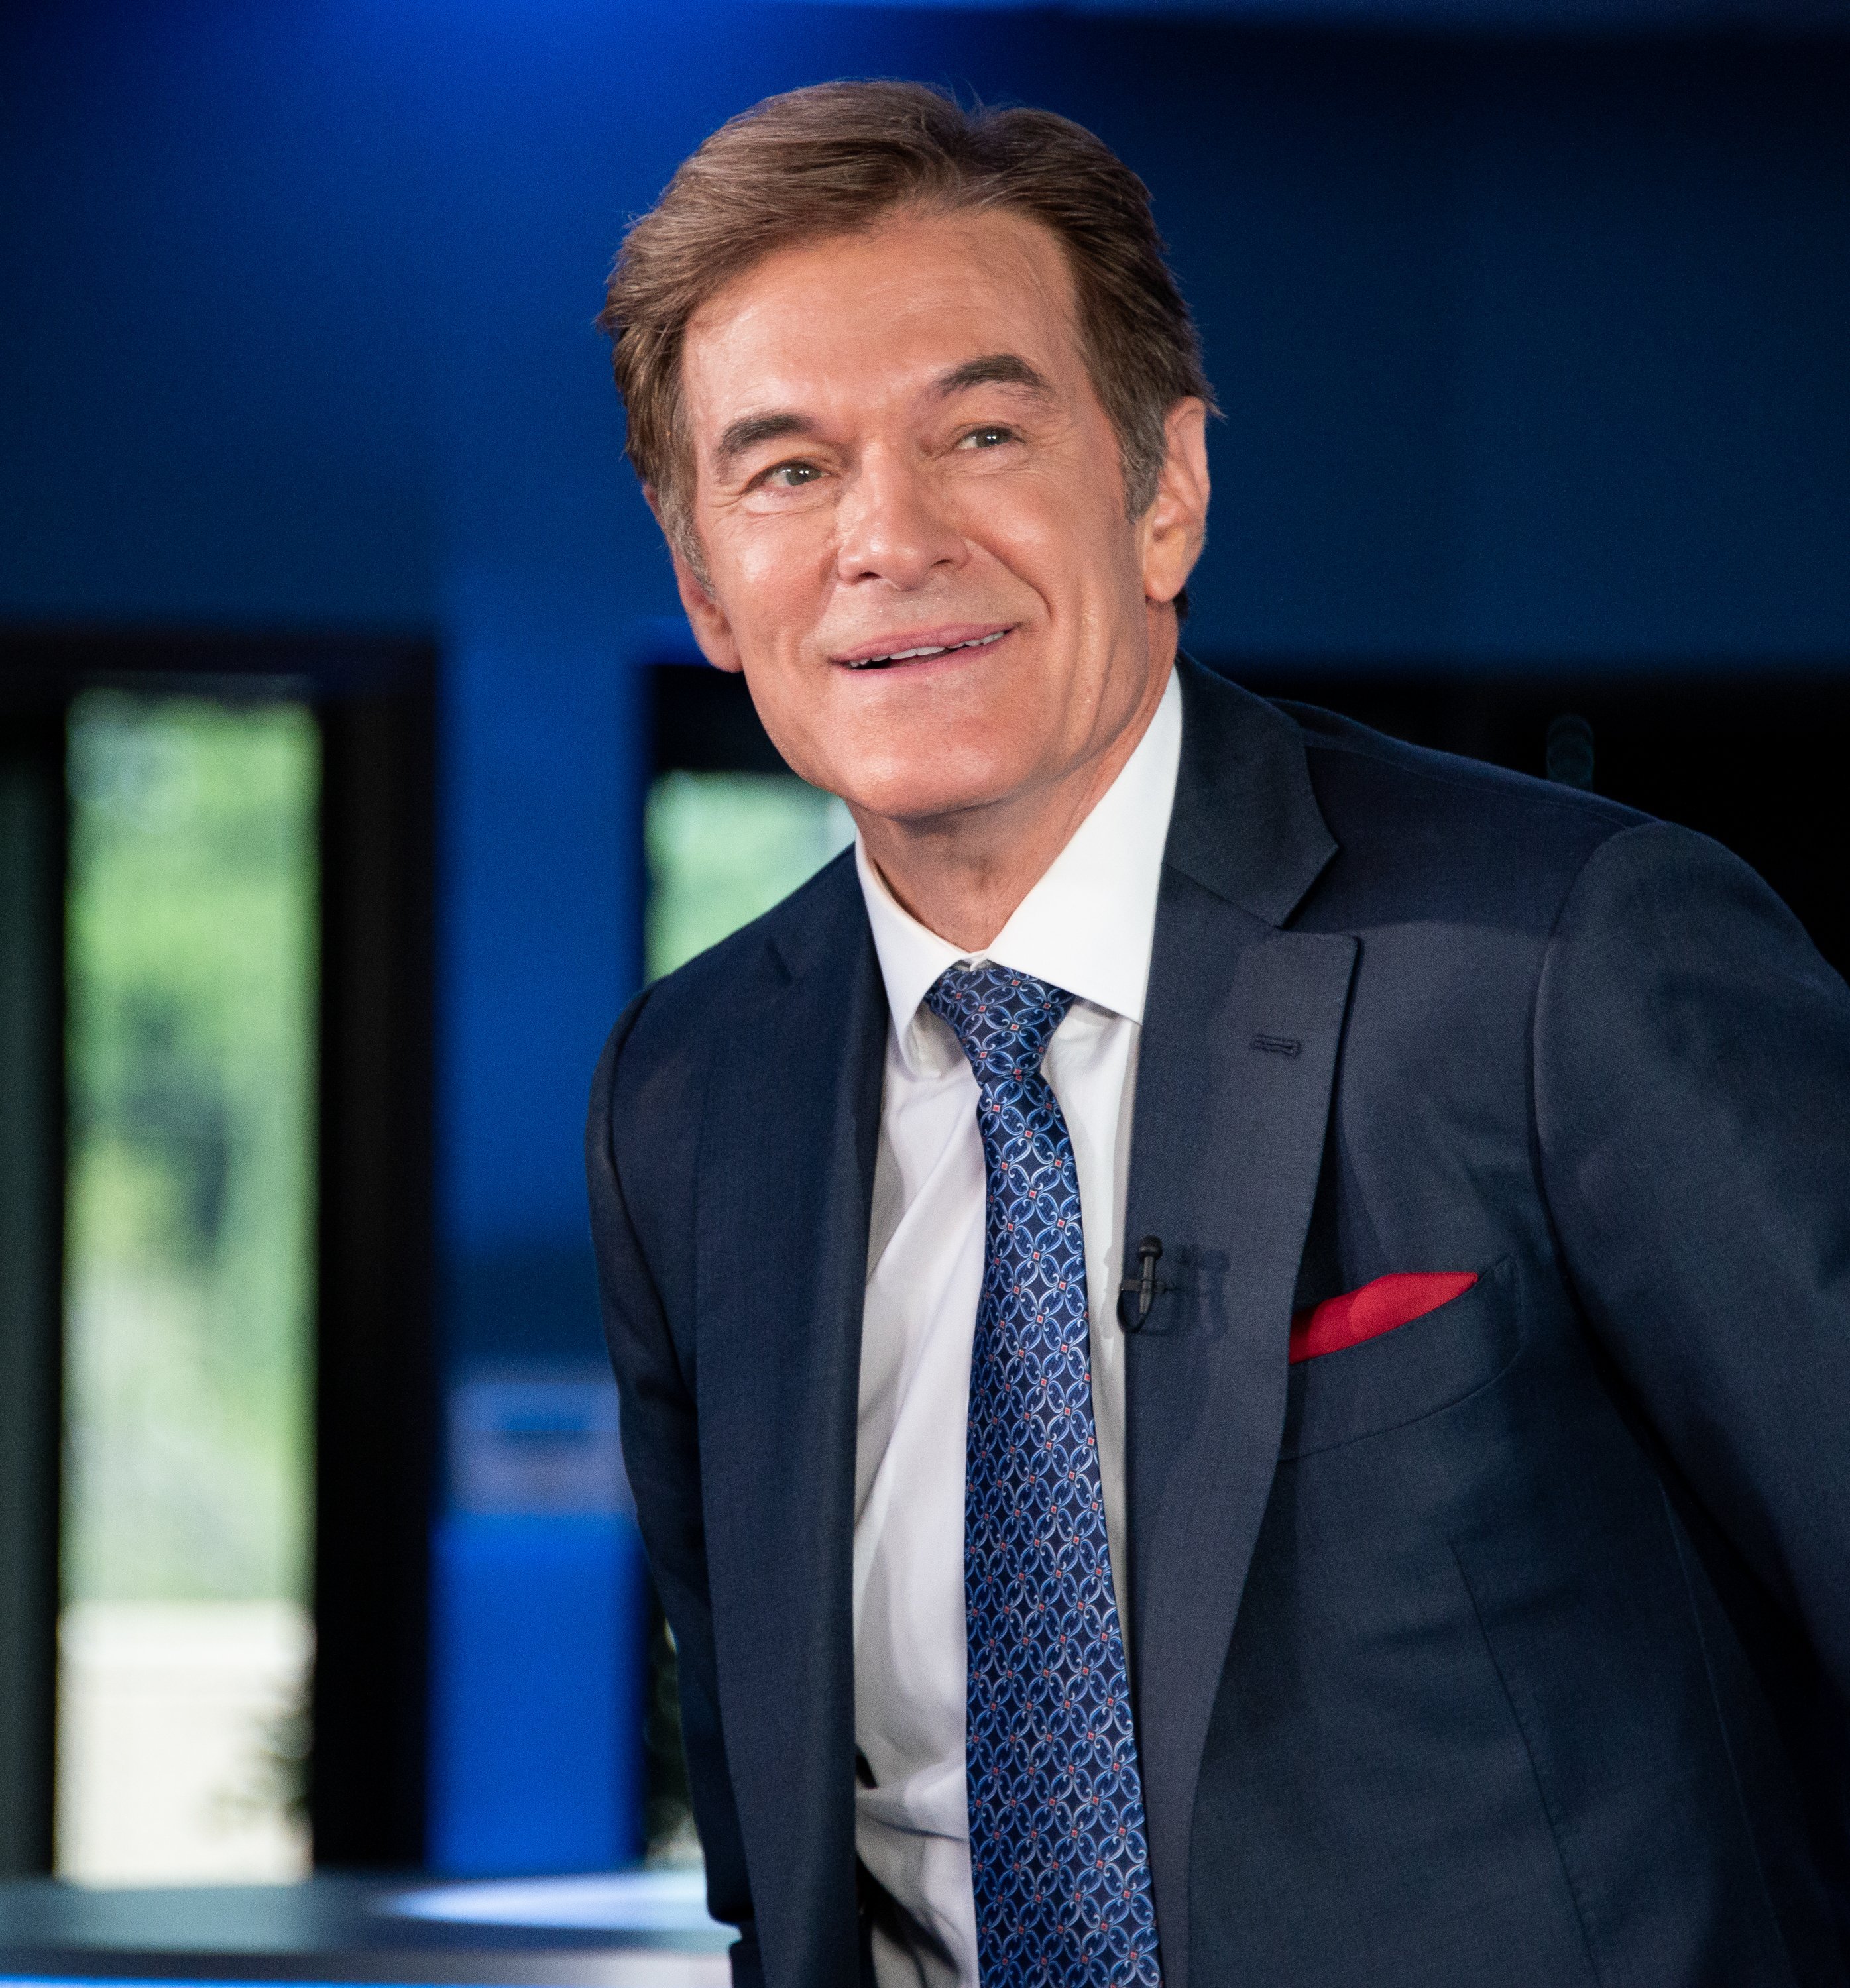 Dr. Mehmet Oz visits "Extra" at Burbank Studios on September 17, 2019, in Burbank, California. | Source: Getty Images.